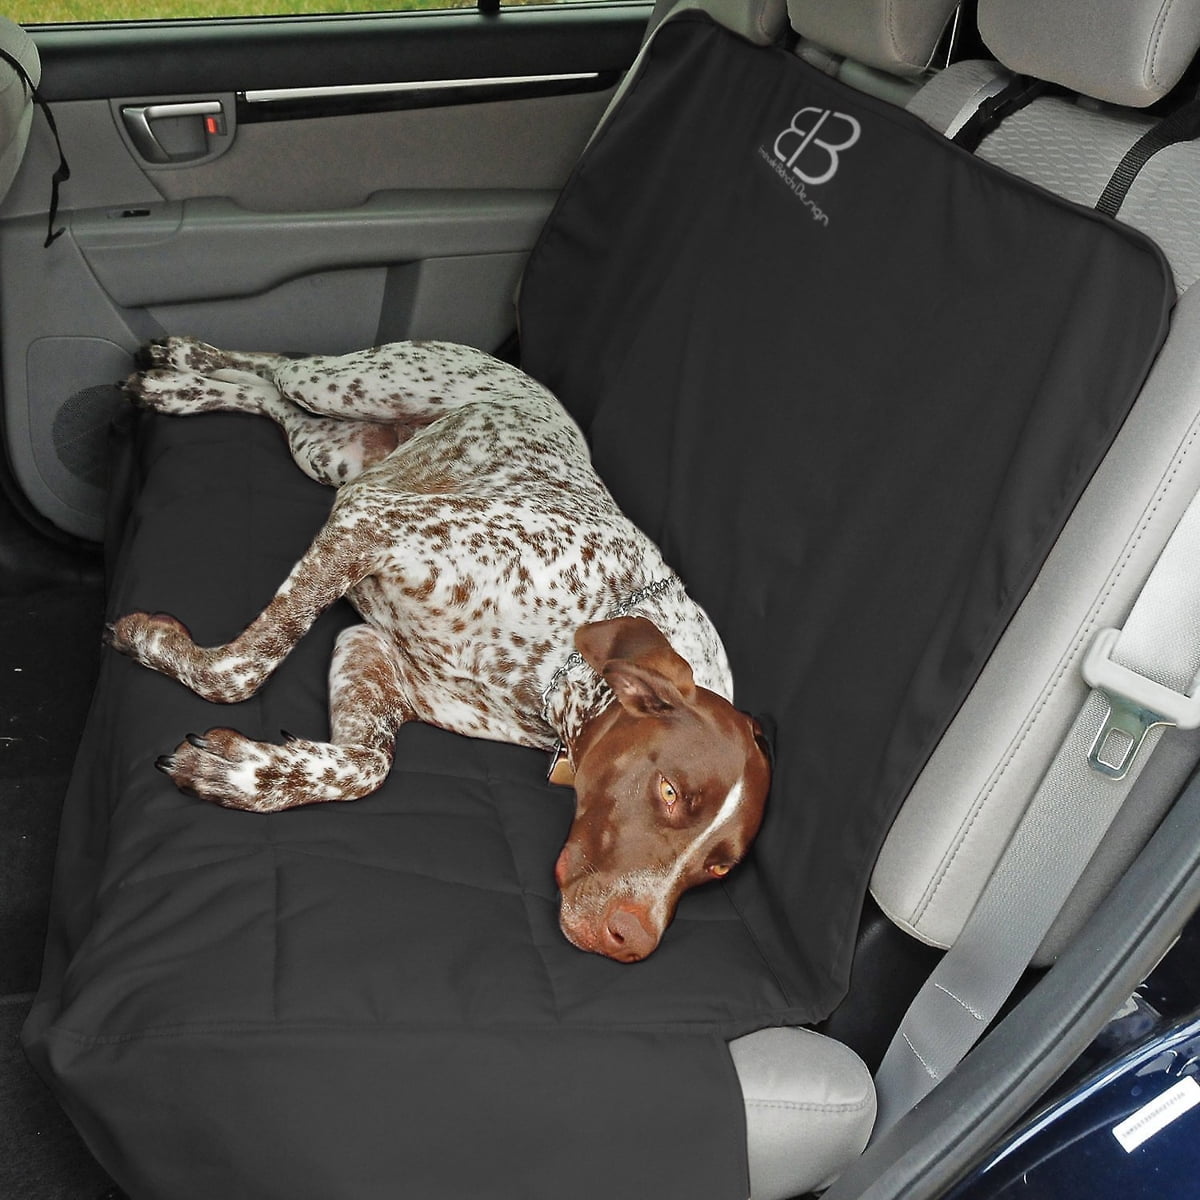 ProtectPro™ Dog Car Seat Cover - Heavy Duty, Waterproof, and Scratch Proof Back  Seat Protector - Travel